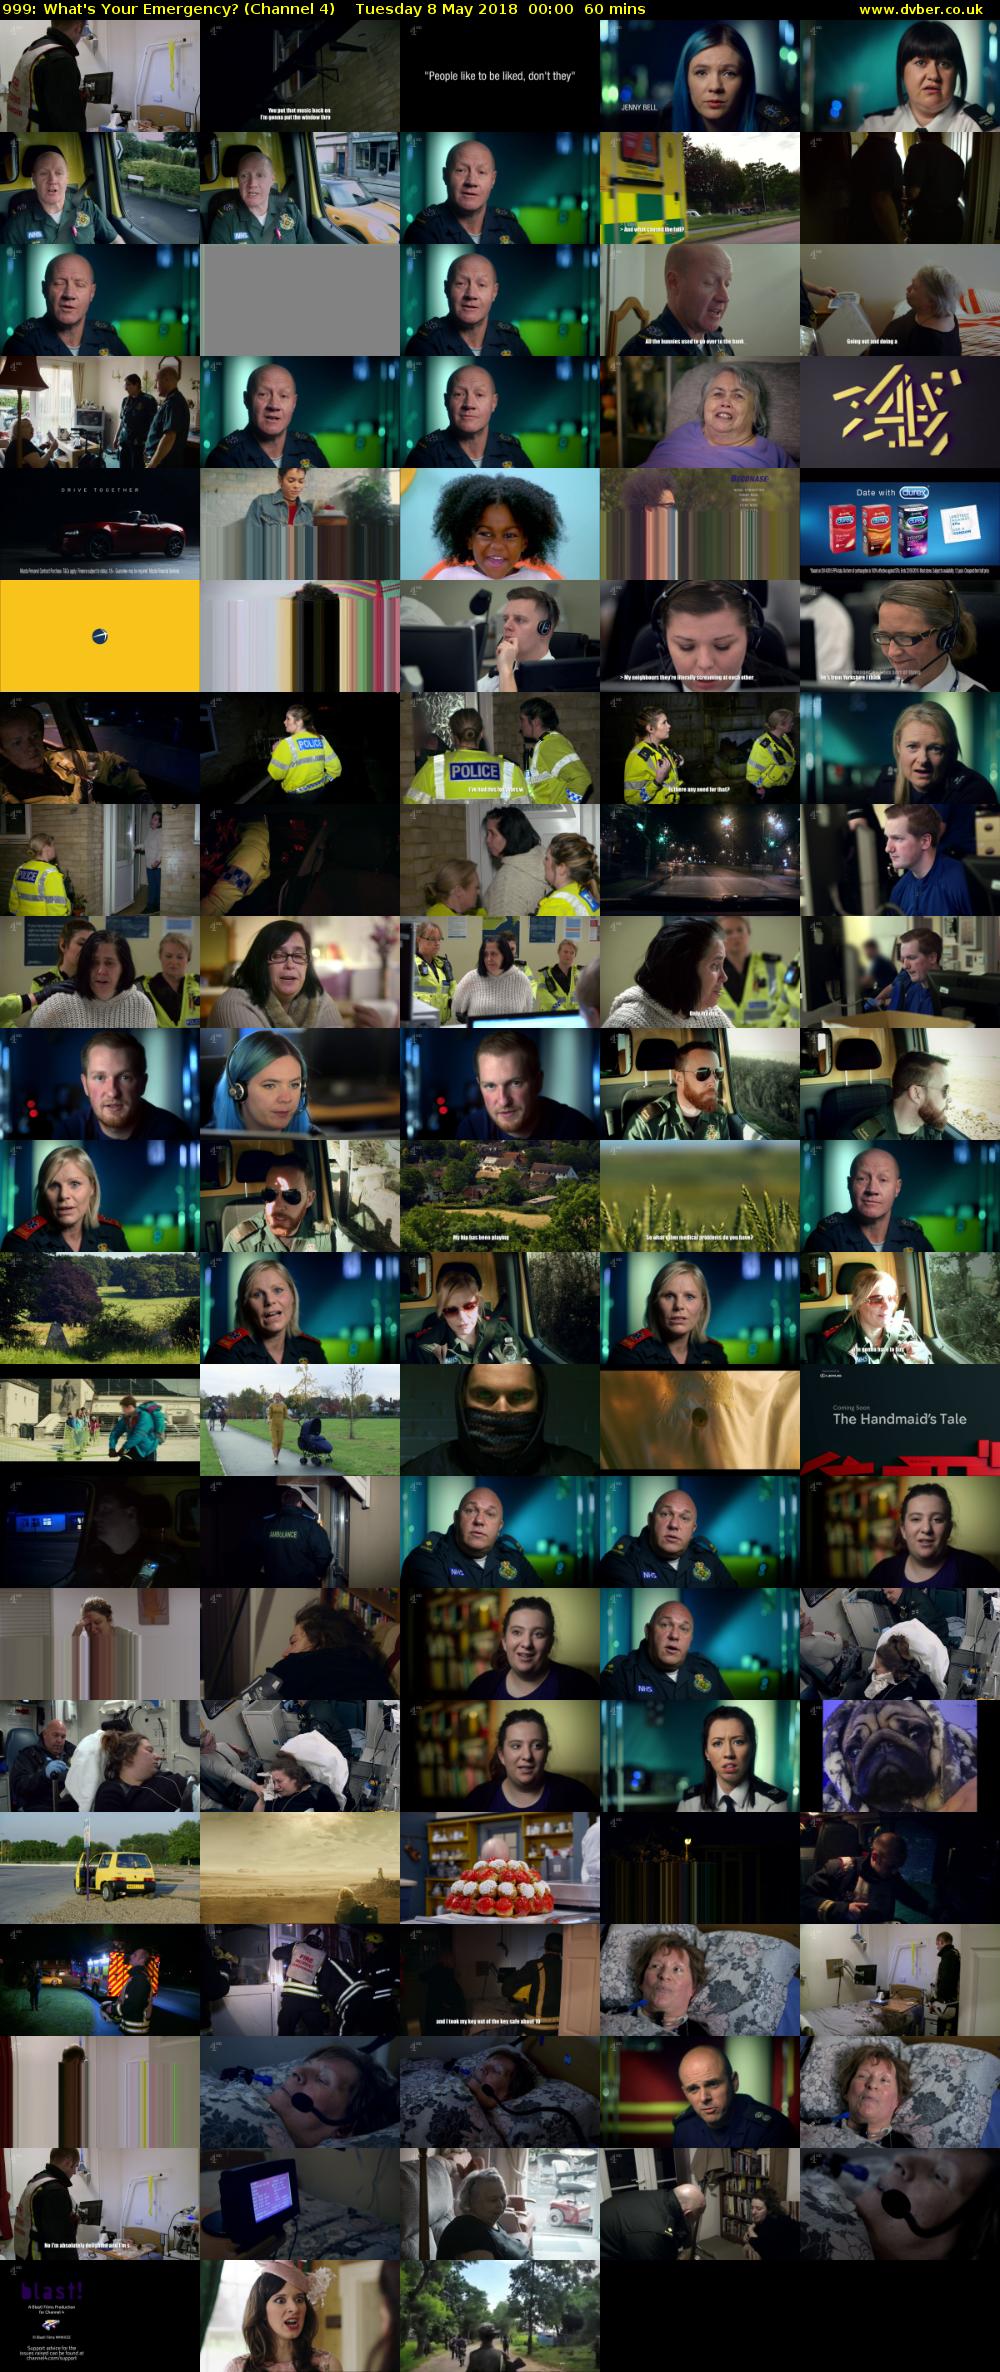 999: What's Your Emergency? (Channel 4) Tuesday 8 May 2018 00:00 - 01:00